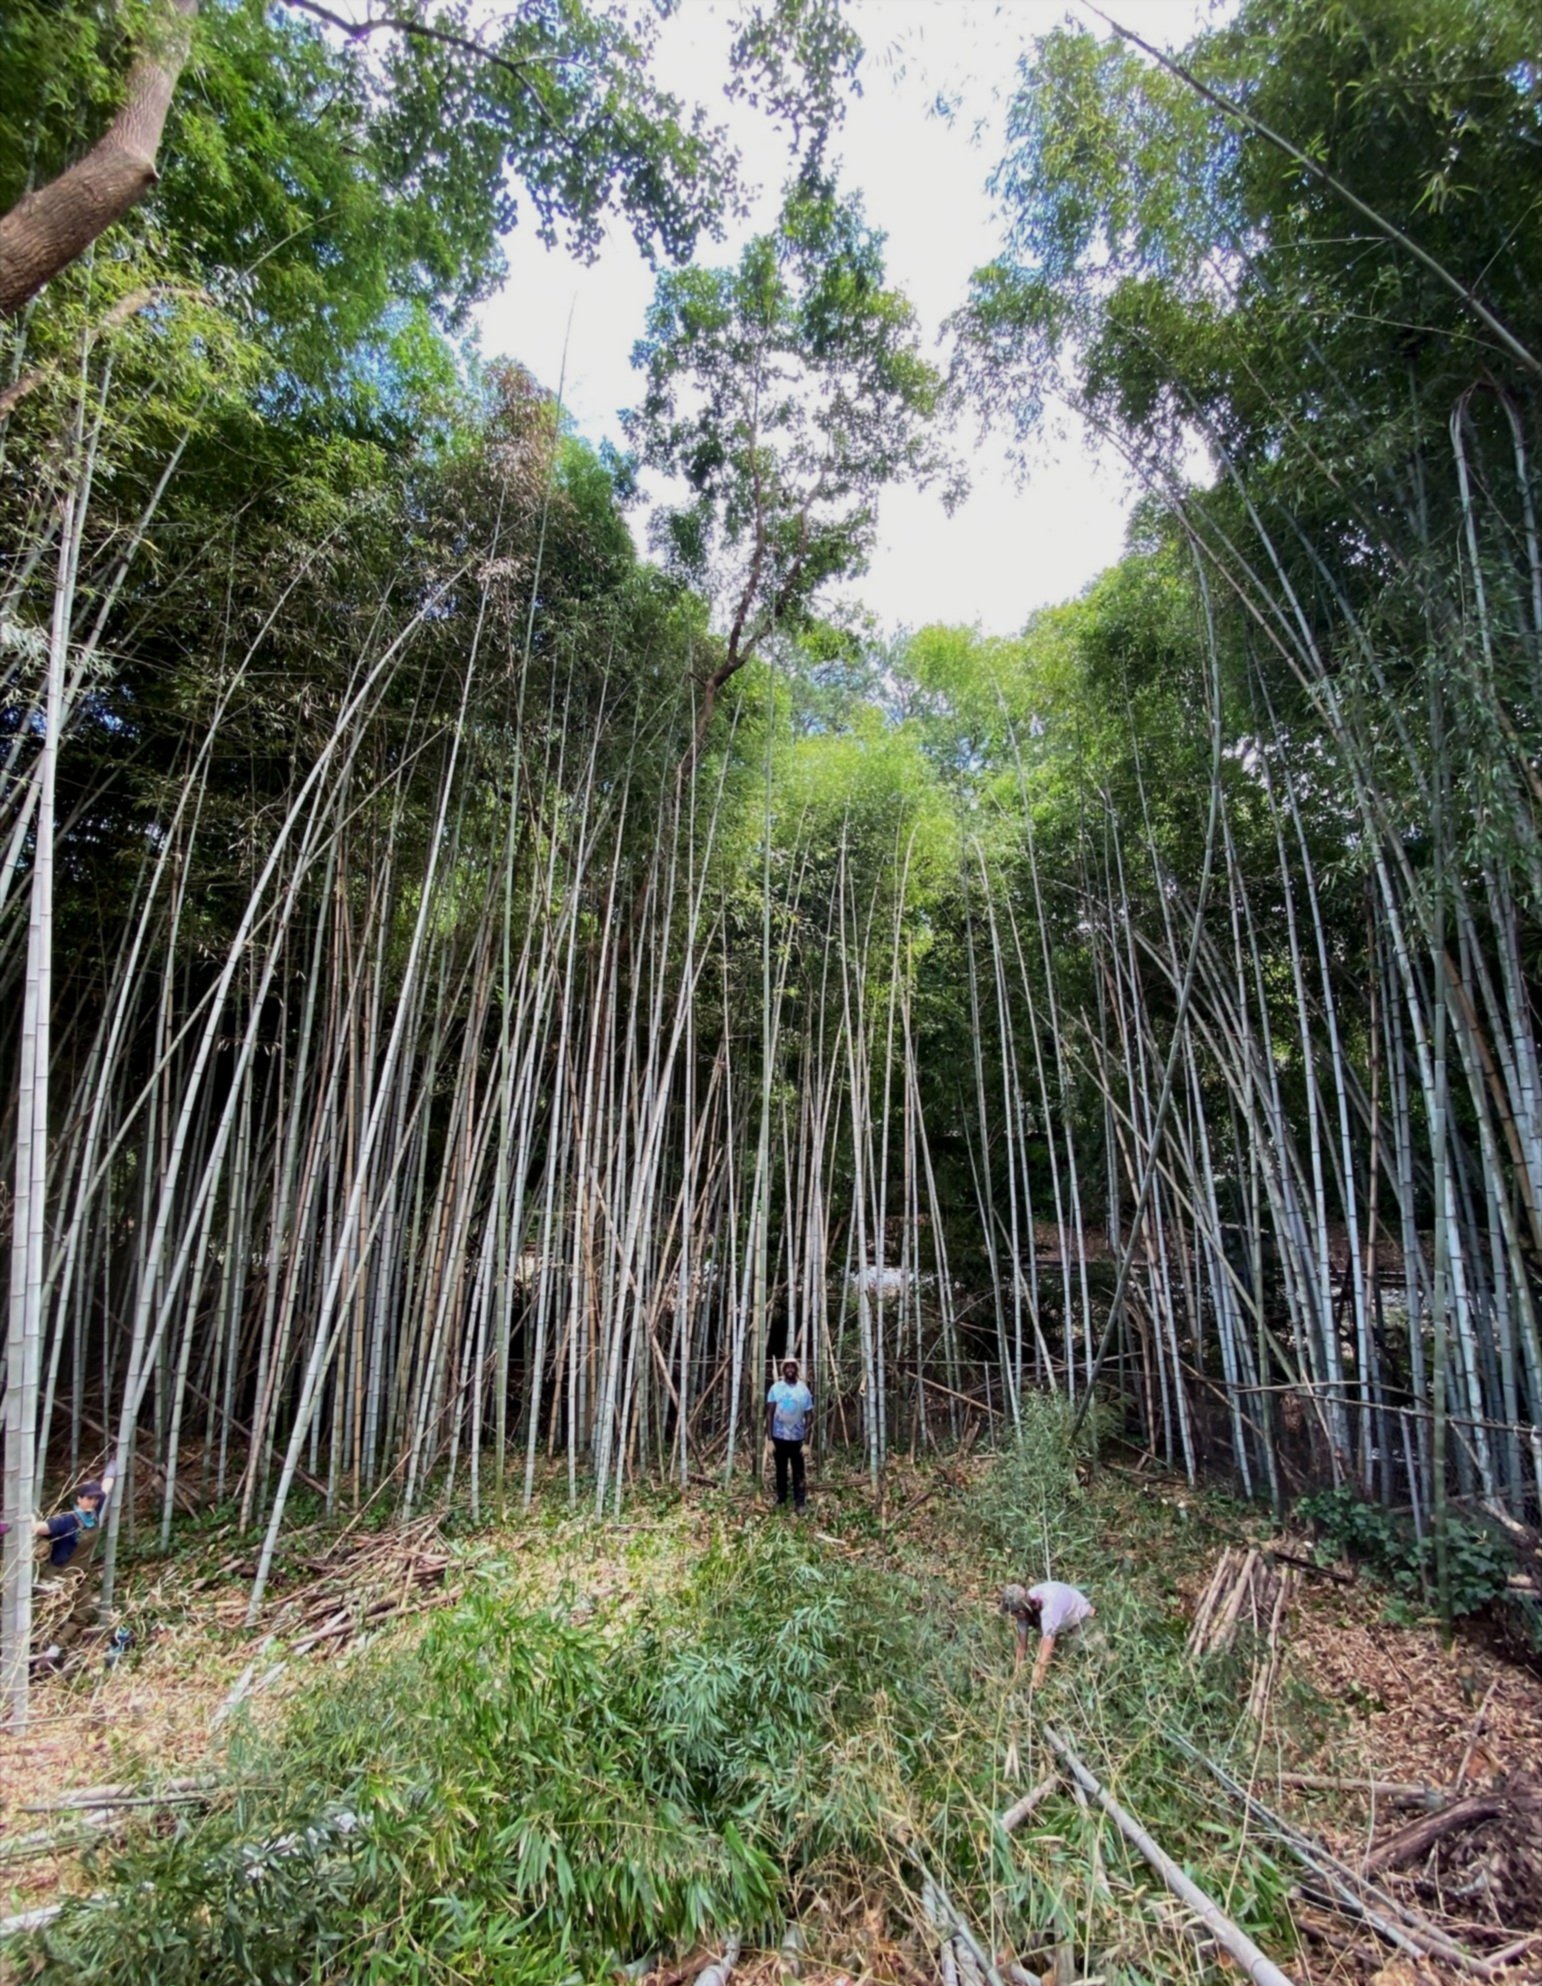  Giant bamboo control, processing and removing canes. 